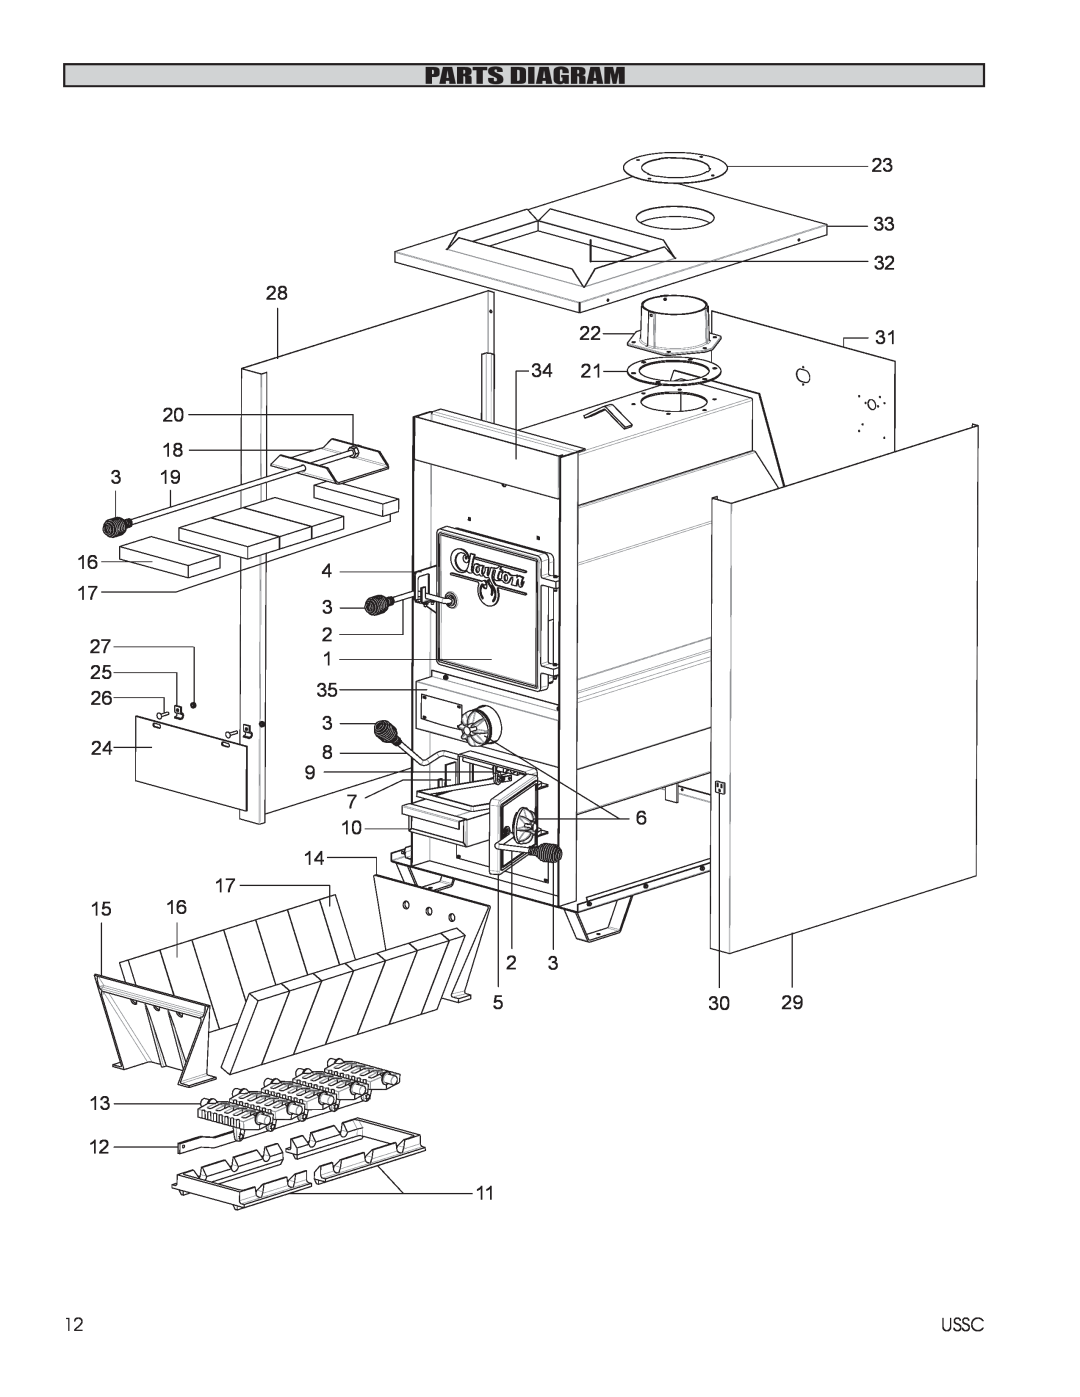 United States Stove 1602M installation instructions Parts Diagram, 20 18 3 16 17 27 25, 28 4 